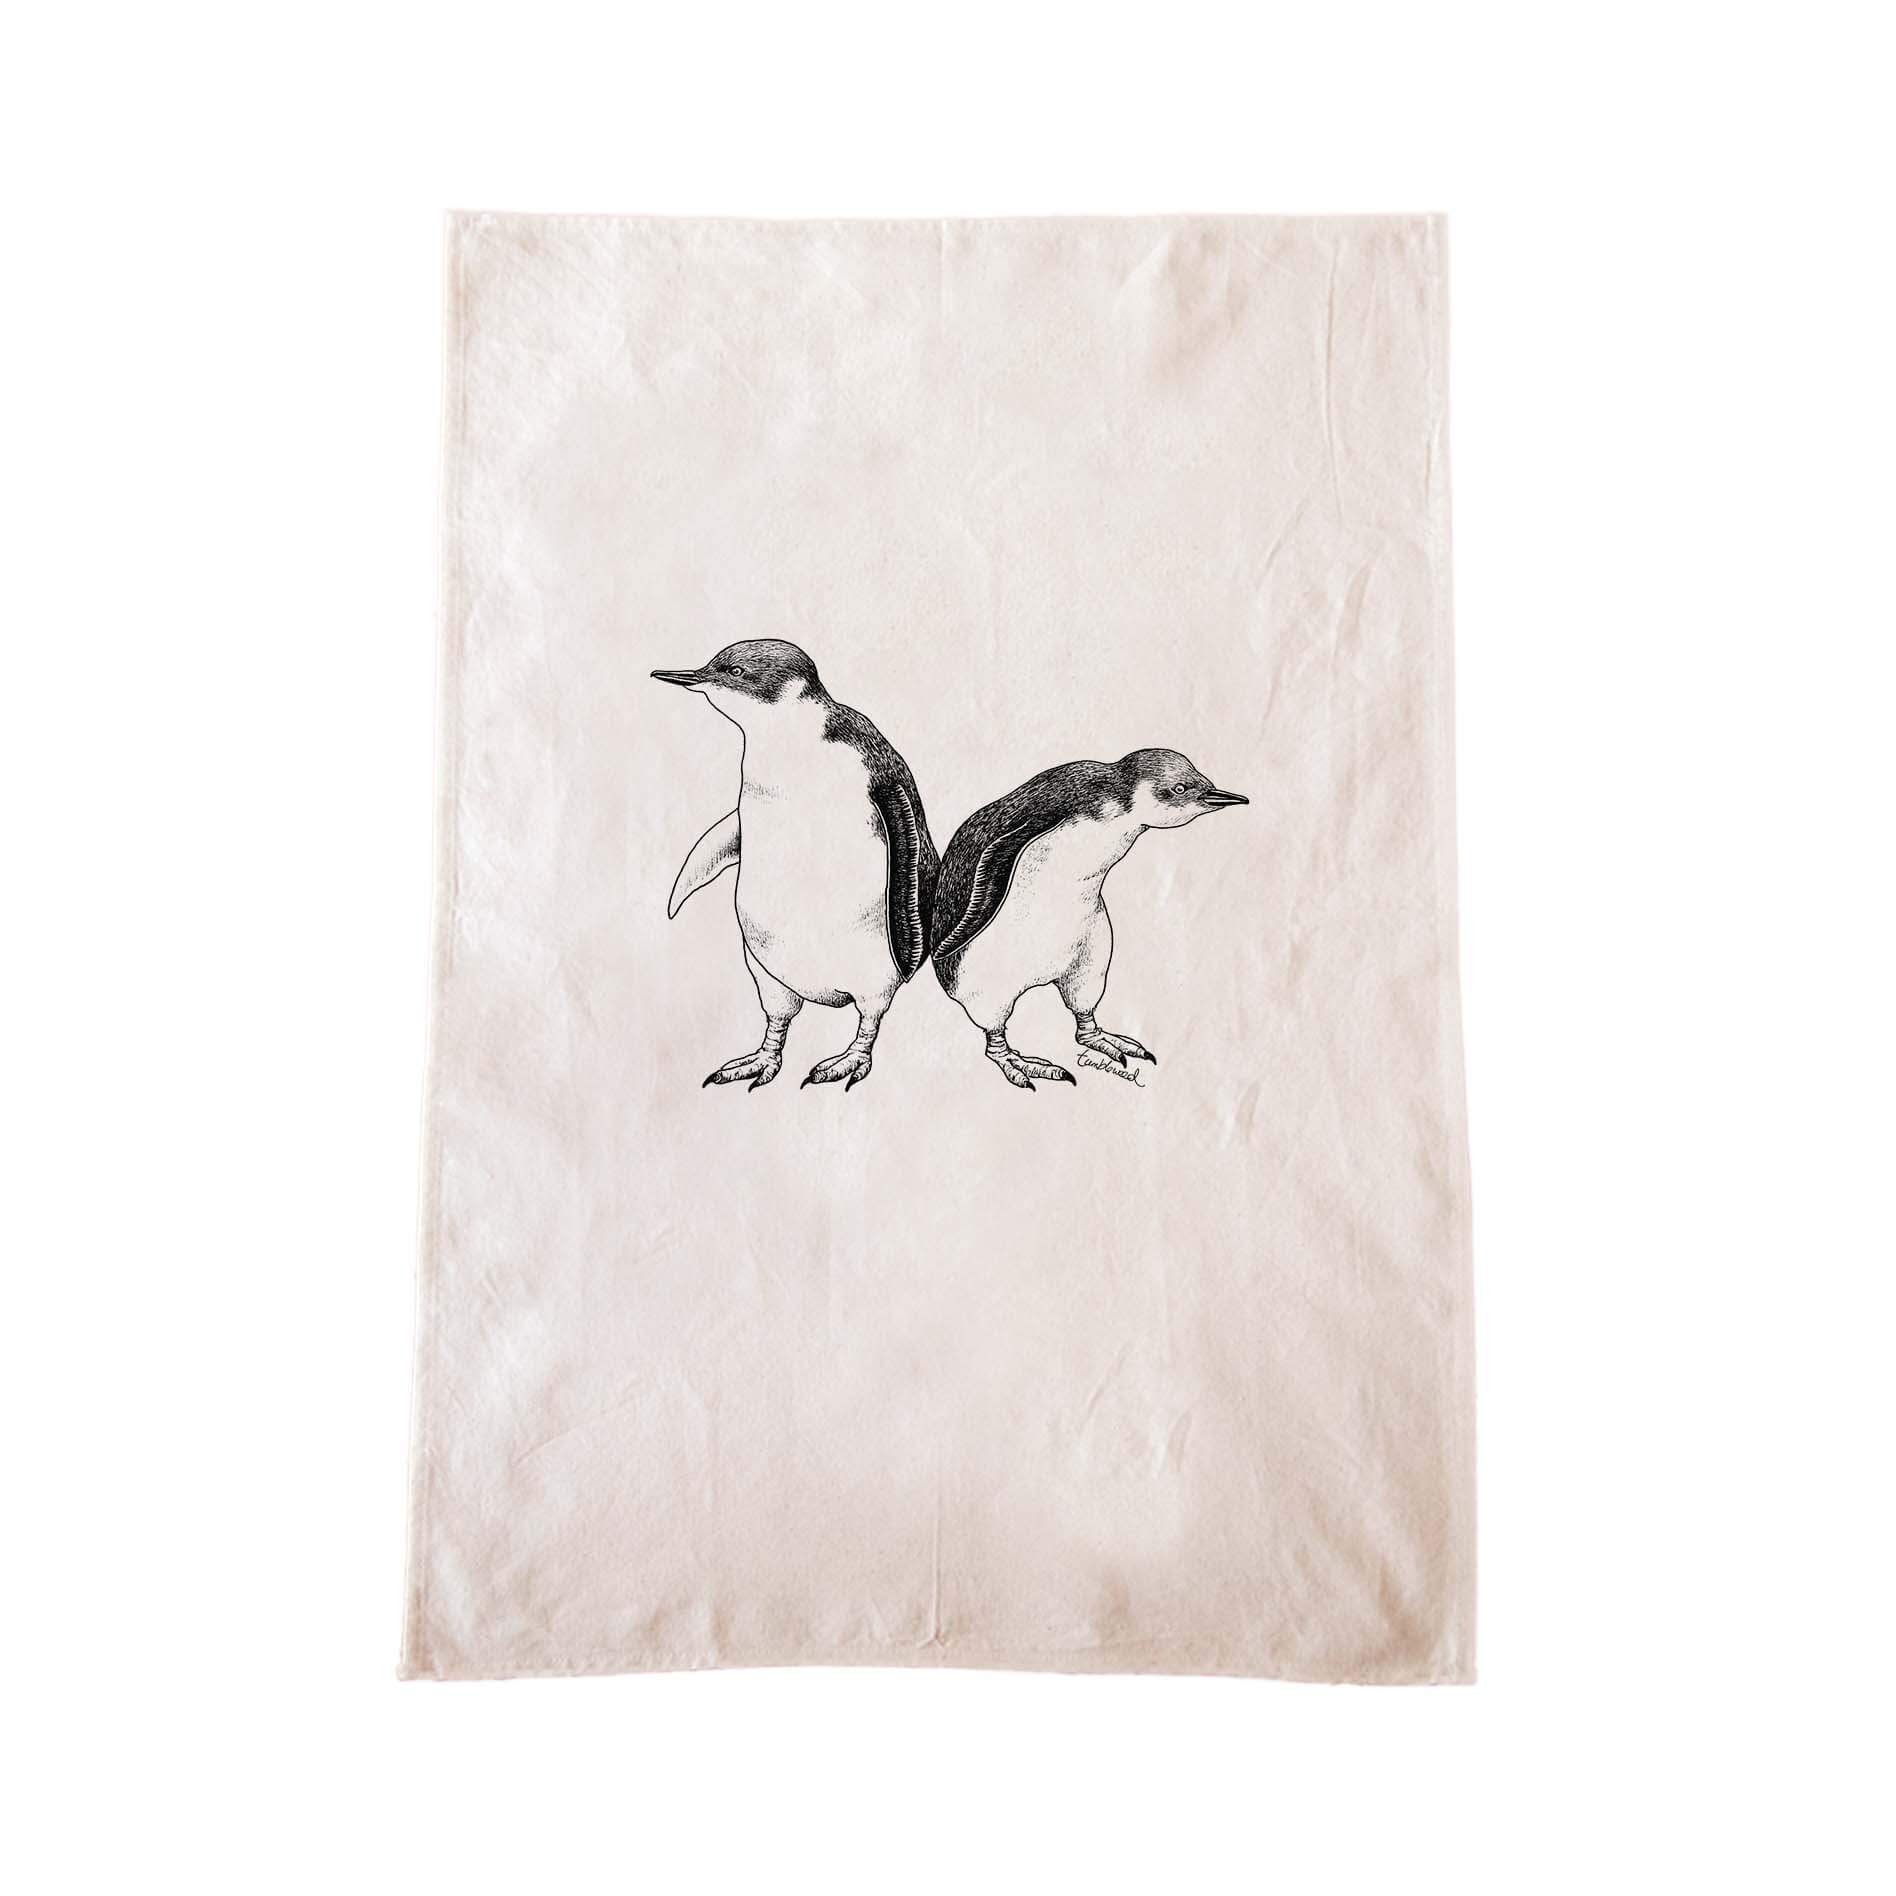 Off-white cotton tea towel with a screen printed Little Blue Penguin design.